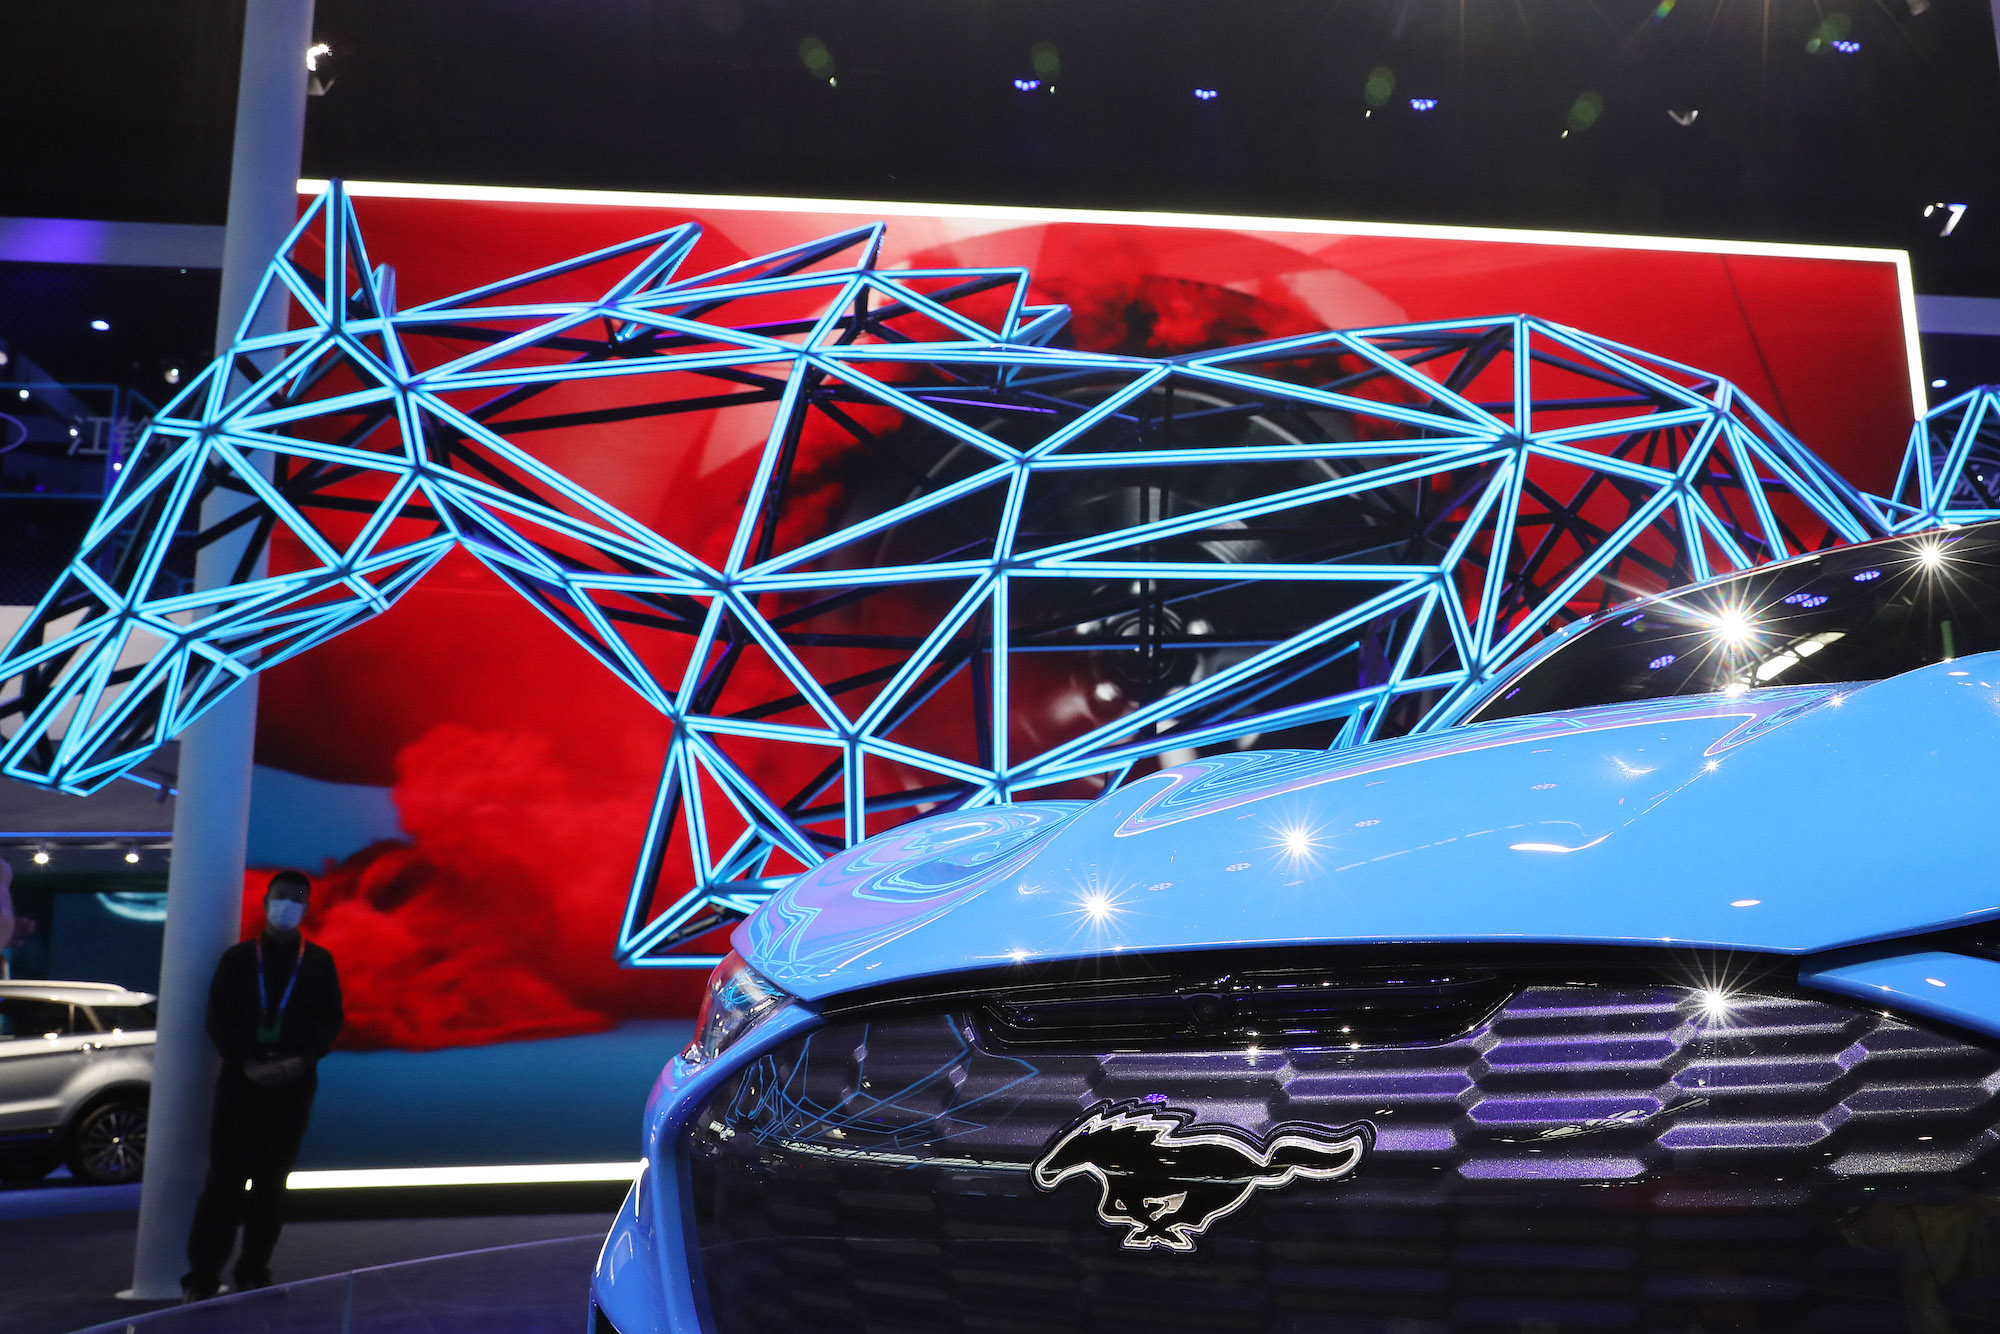 A Ford Mustang Mach-E sports car is on display during 2020 Beijing International Automotive Exhibition